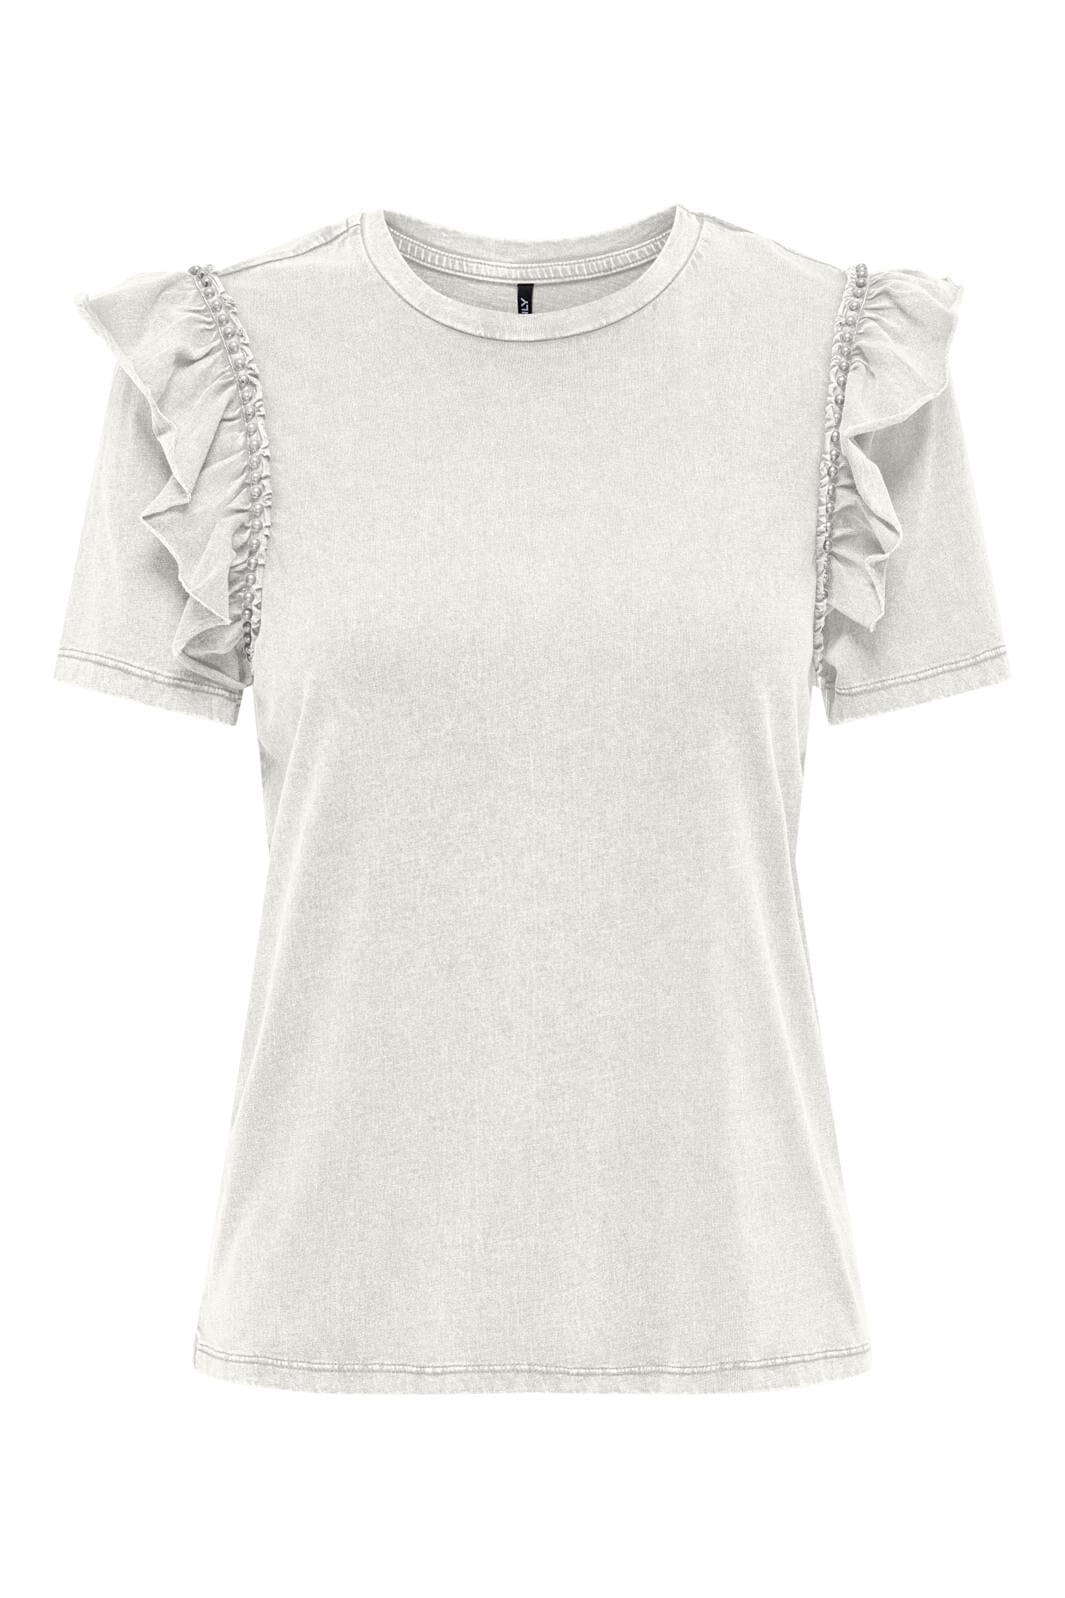 Only - Onllucy S/S Pearl Top - 4649177 Cloud Dancer Pearl